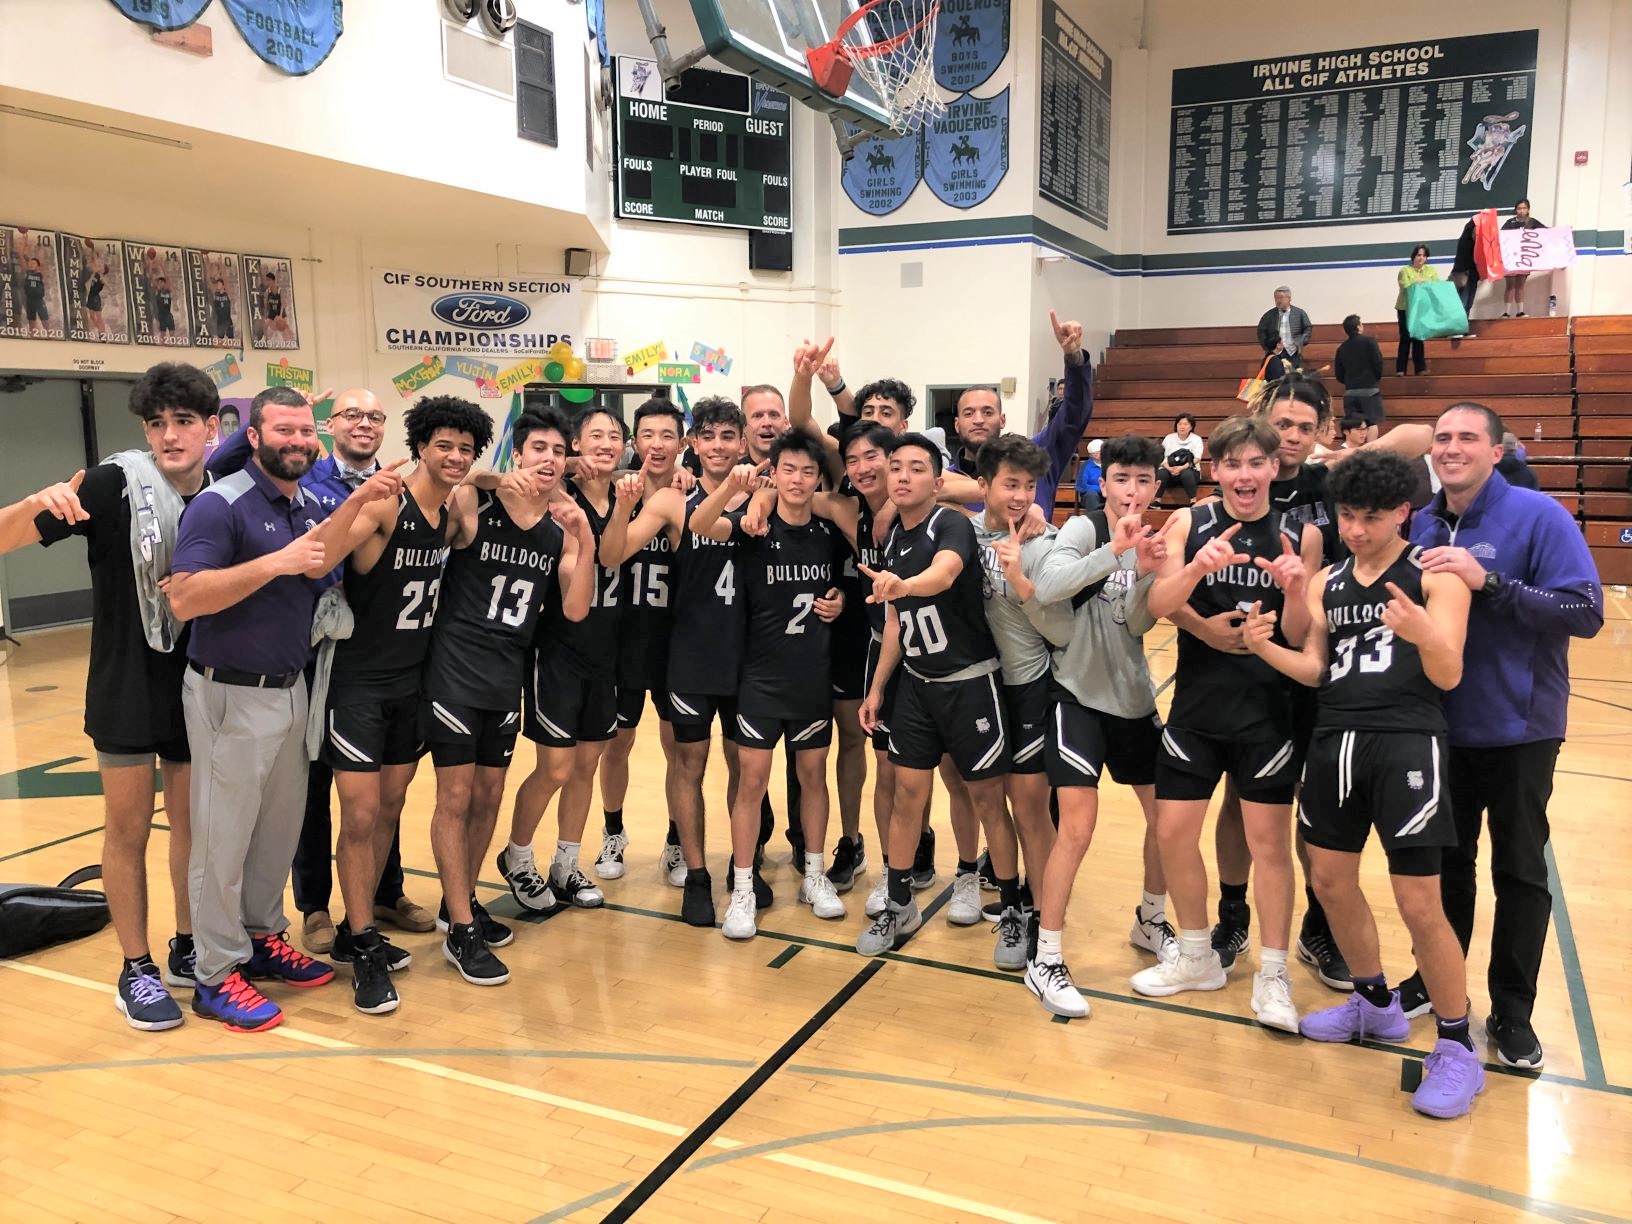 Portola races past Irvine 70-51 and wins outright PCL crown, a first ...